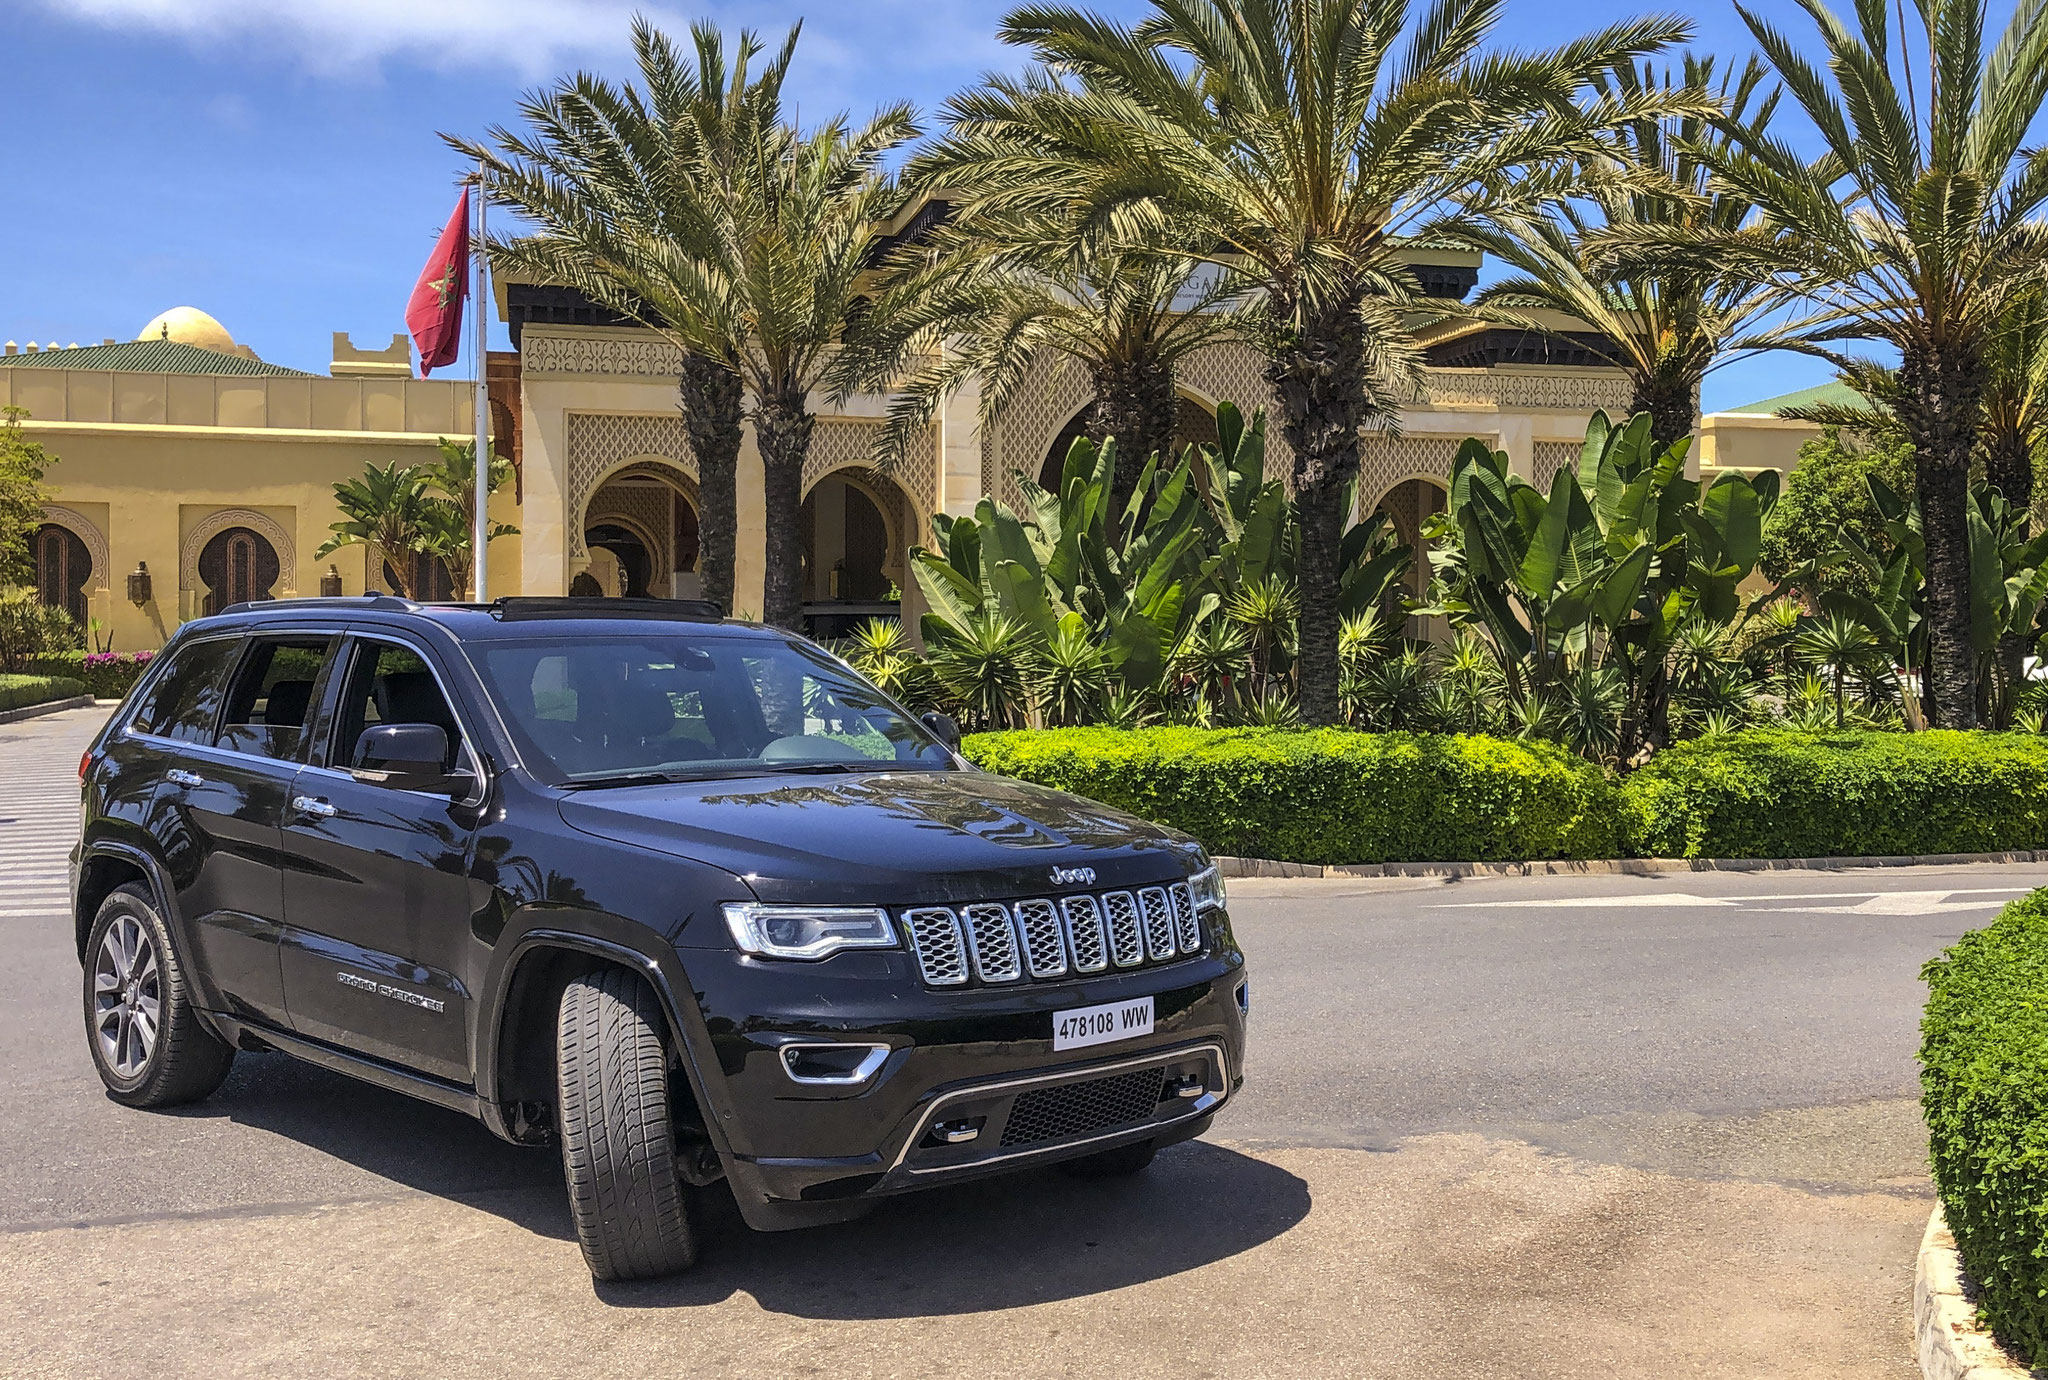 Our new Jeep Grand Cherokee Overland 2019